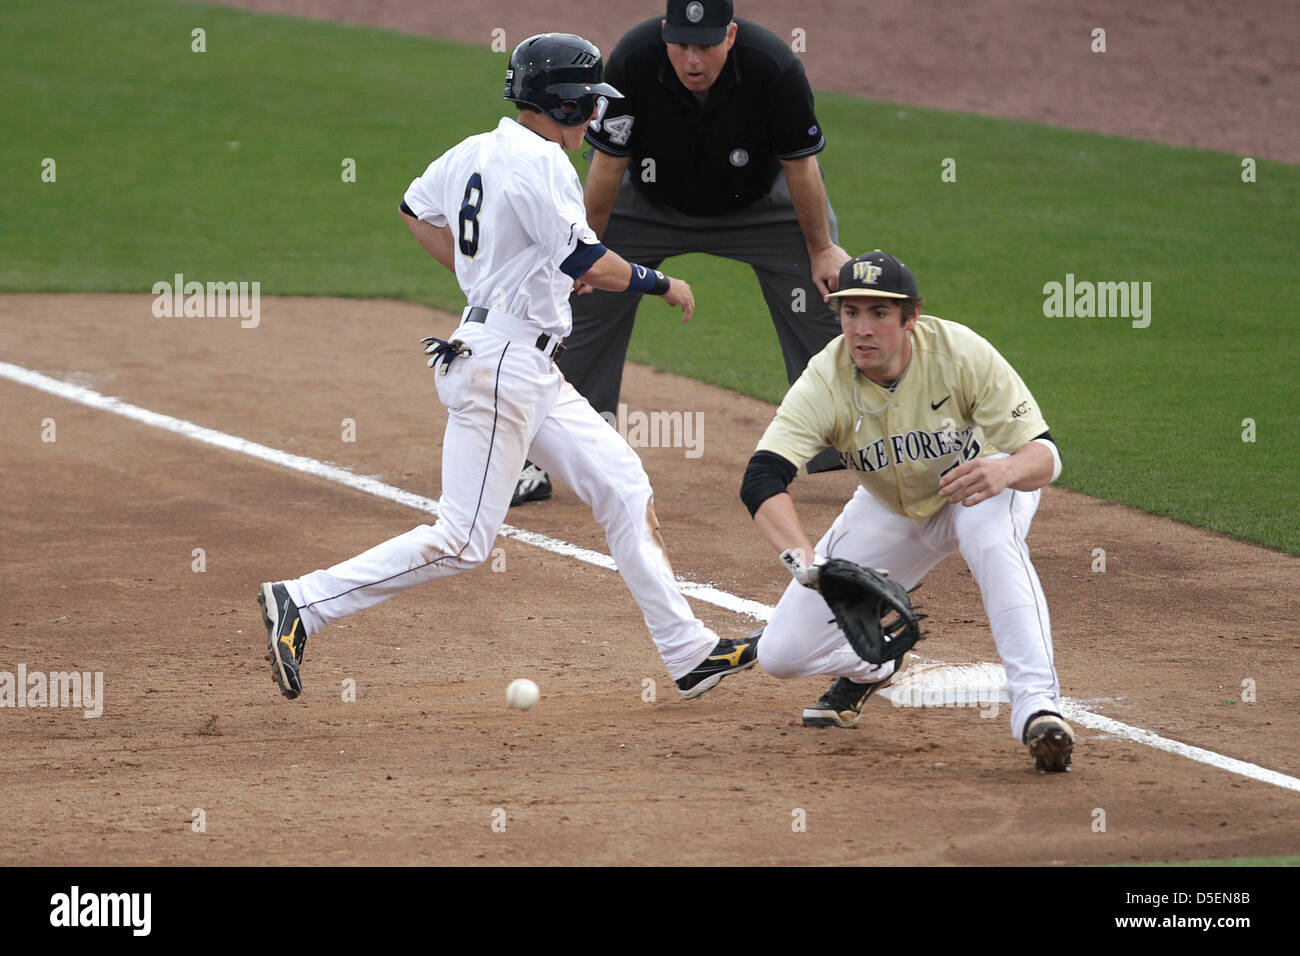 Atlanta, Georgia, USA. 30th March, 2013. The Georgia Tech Yellow Jackets wrapped up a 3-game series with a double header against the the Wake Forest Demon Deacons at Russ Chandler Stadium in Atlanta Georgia. Kyle Wren (8) beats the throw to Demon Deacon 1st baseman Matt Conway (25). The Yellow Jackets dropped the second game to Wake Forest 8-6. Stock Photo